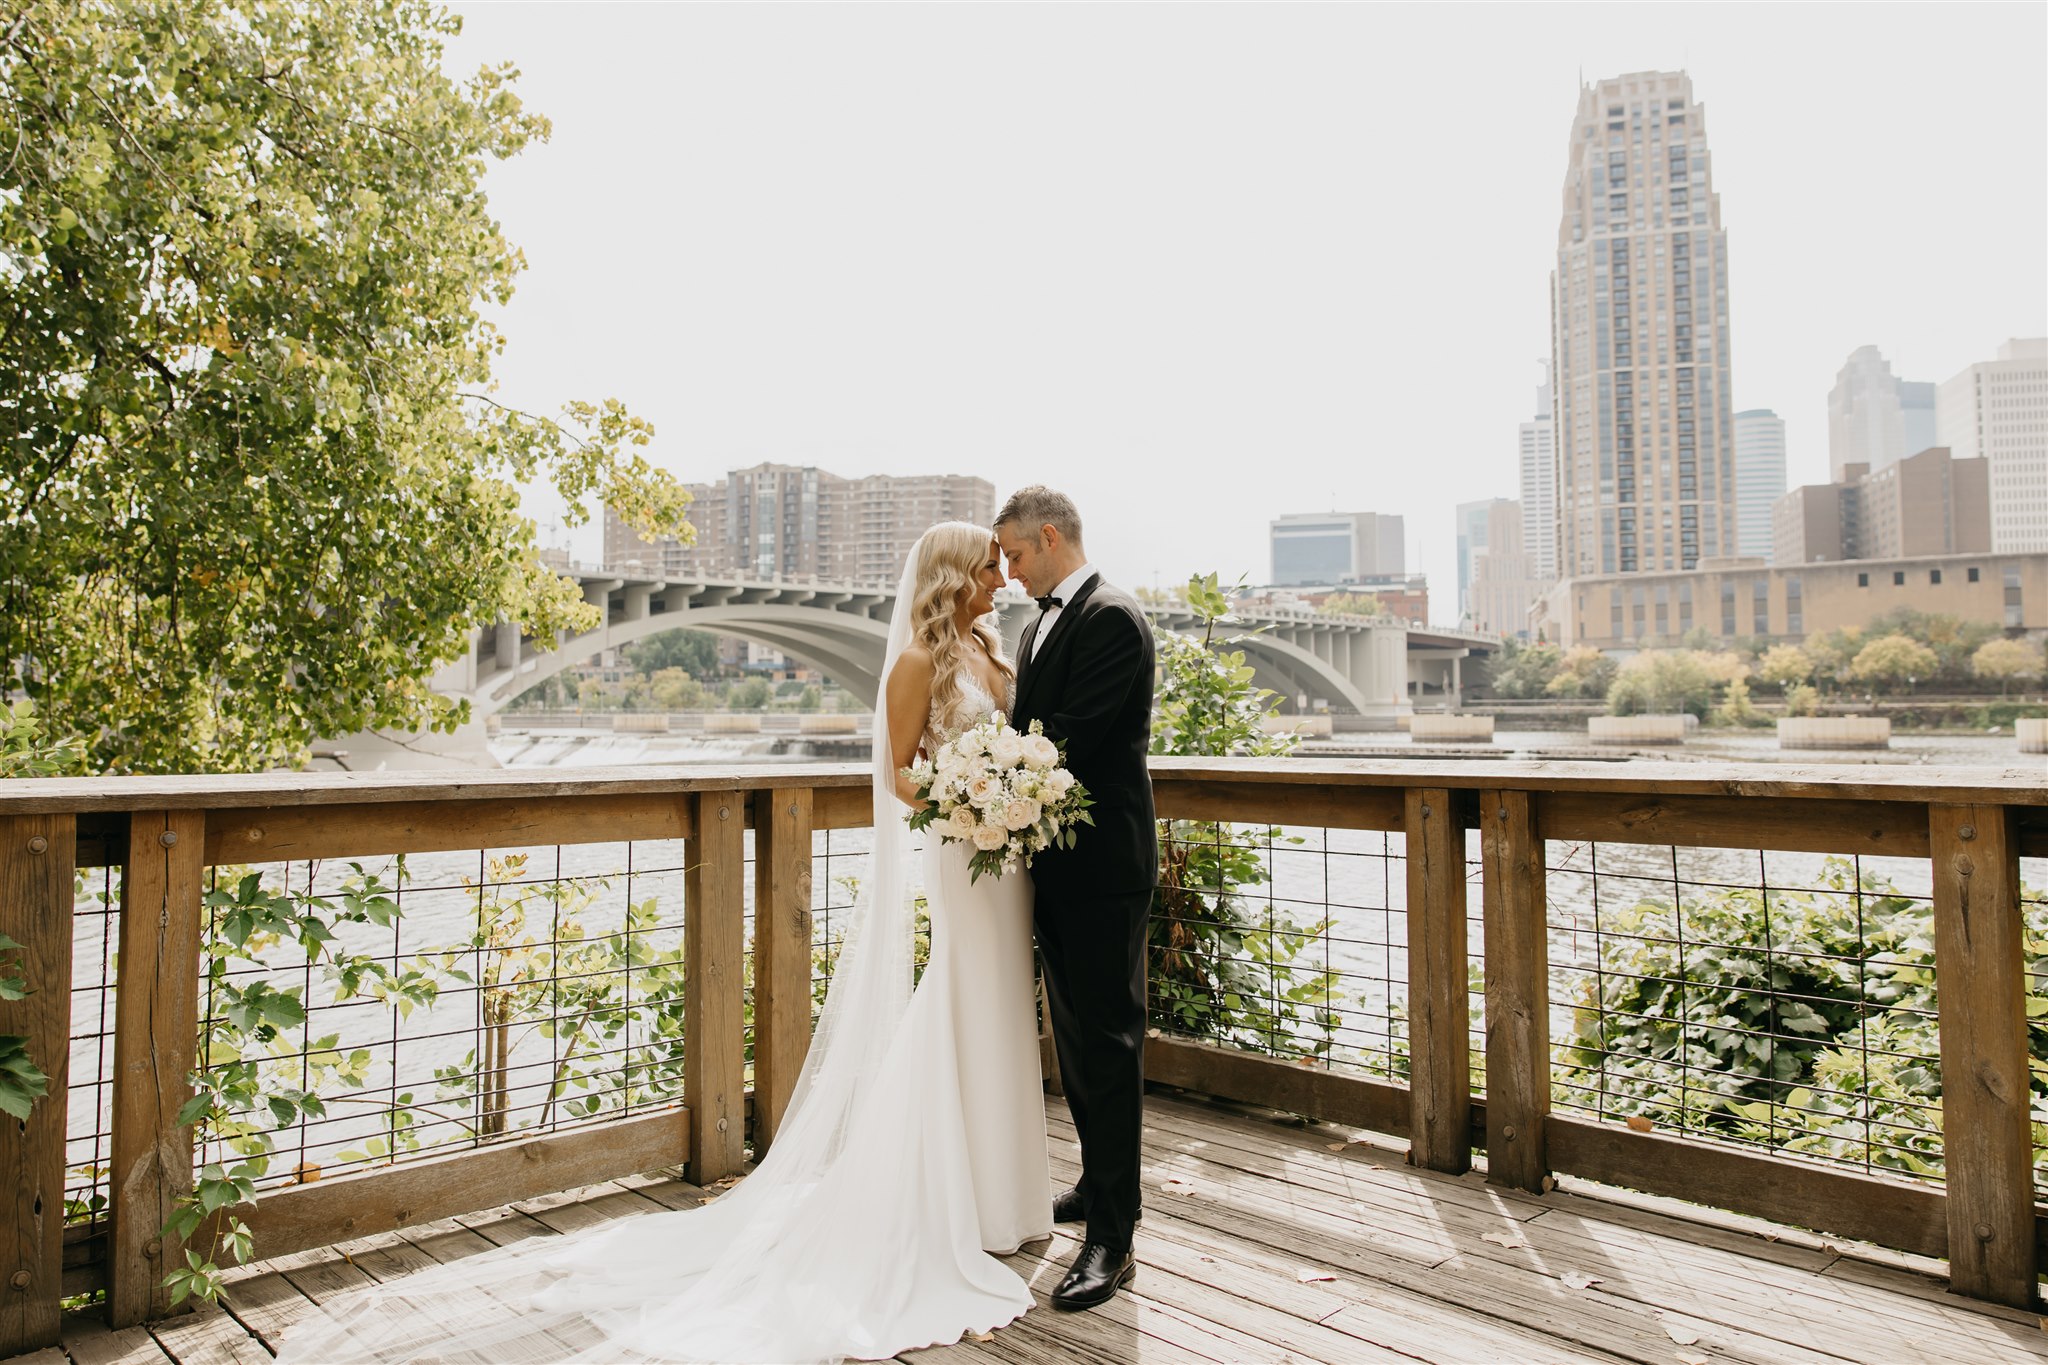 Photo of the bride and groom during their wedding day at Nicollet Island Pavillion